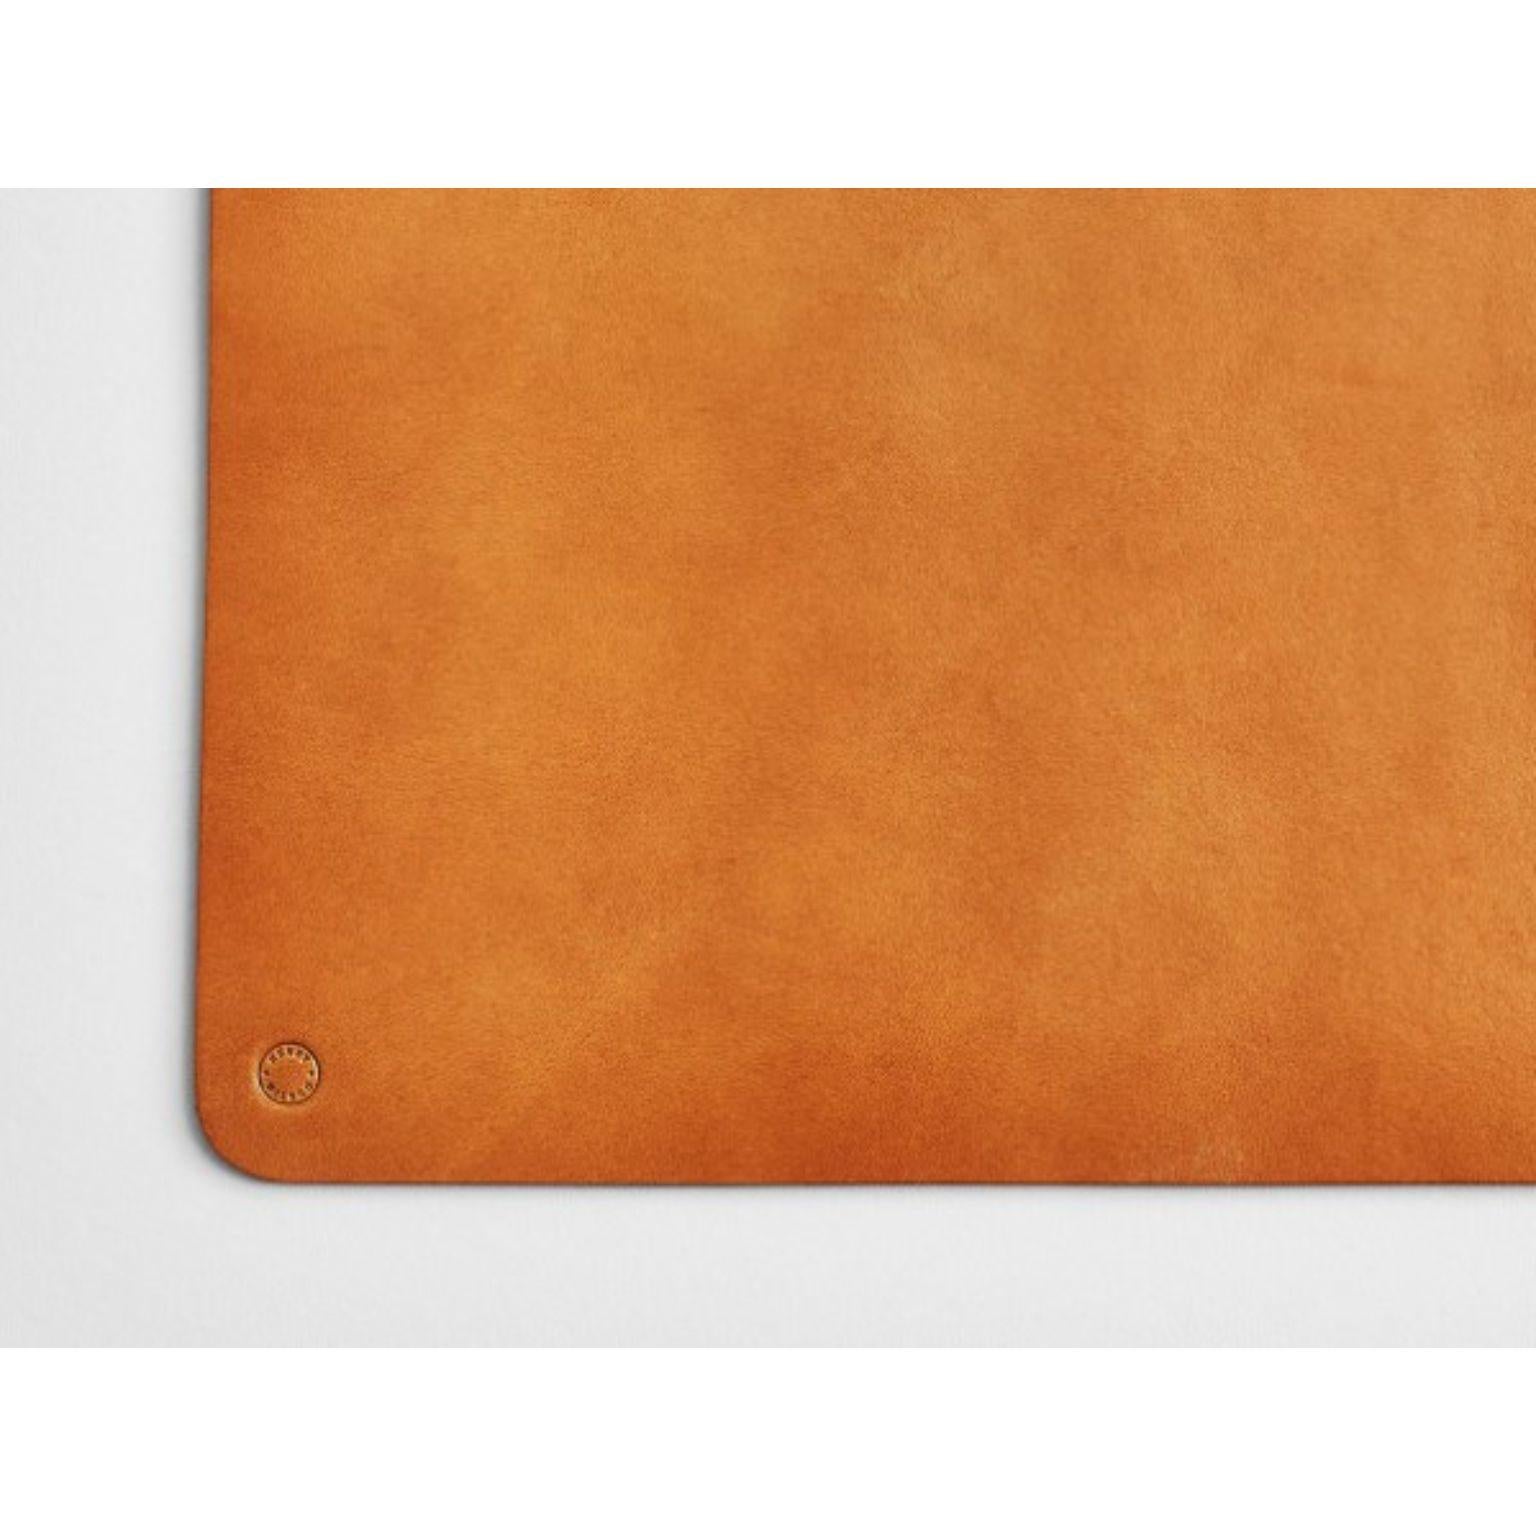 Set of 2 leather desk Mats by Henry Wilson
Dimensions: D 32 x H 22
Materials: Leather

Our leather desk mats are made of vegetable tanned saddle leather imported from Italy. This type of leather is thick and durable, and its ‘half-dressed’ state